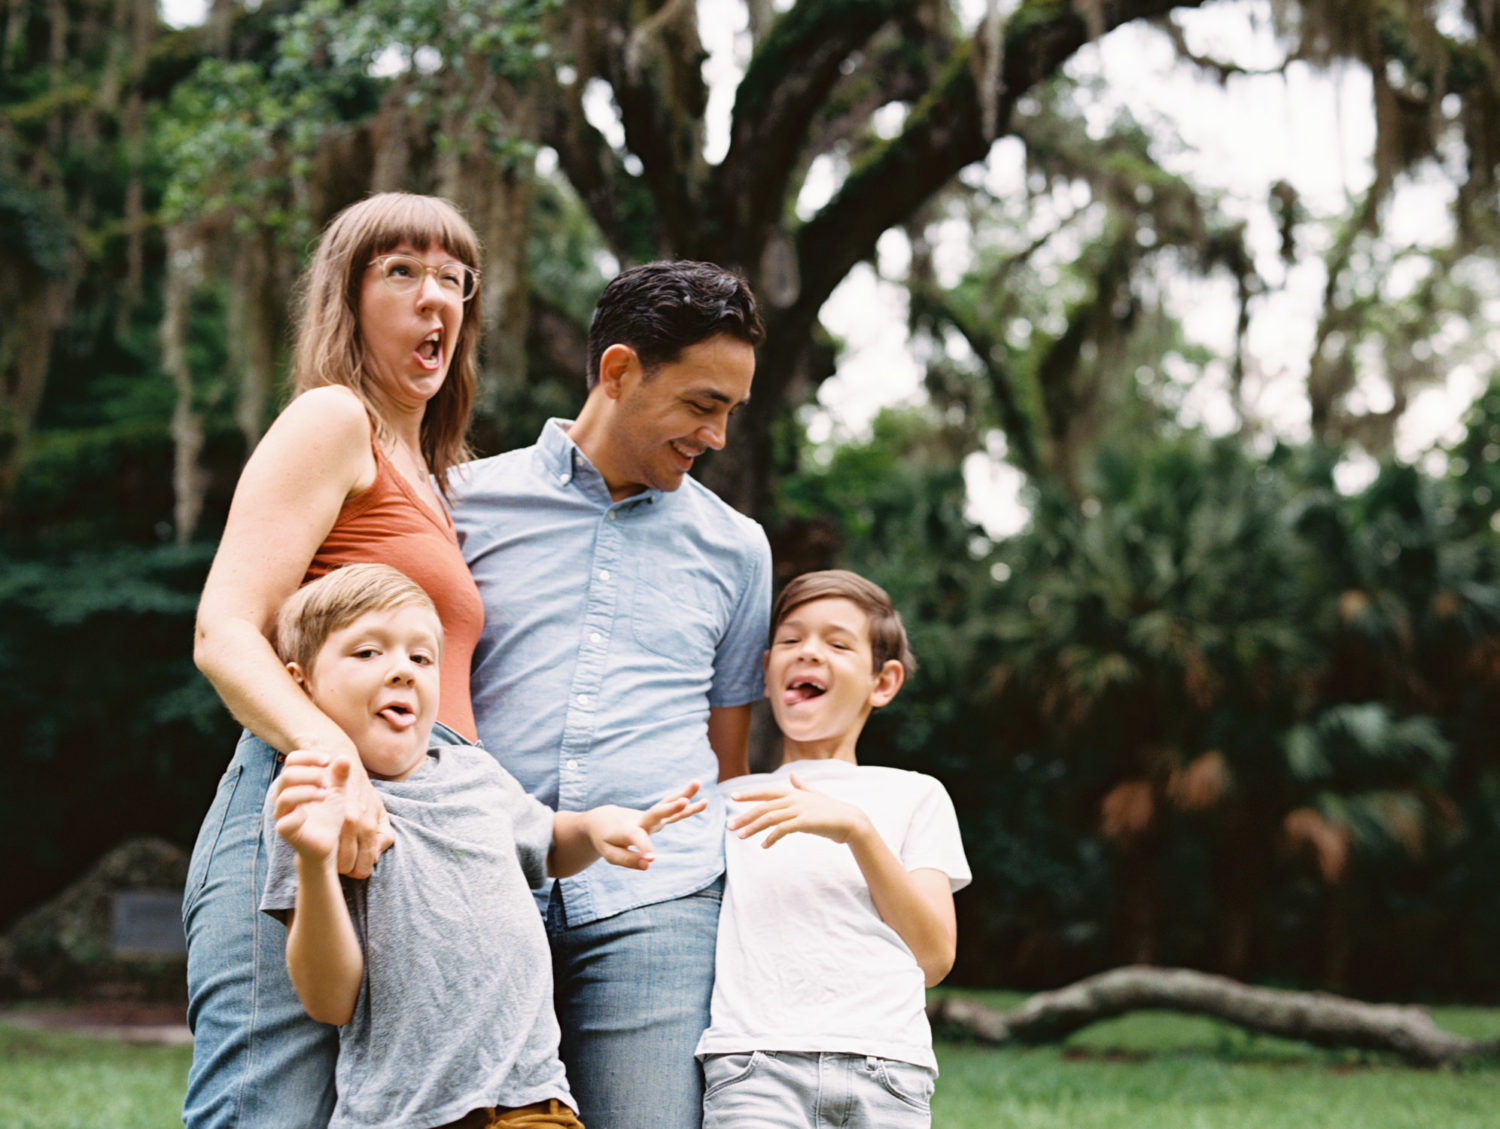 family of four making silly faces and laughing during their outdoor family photoshoot